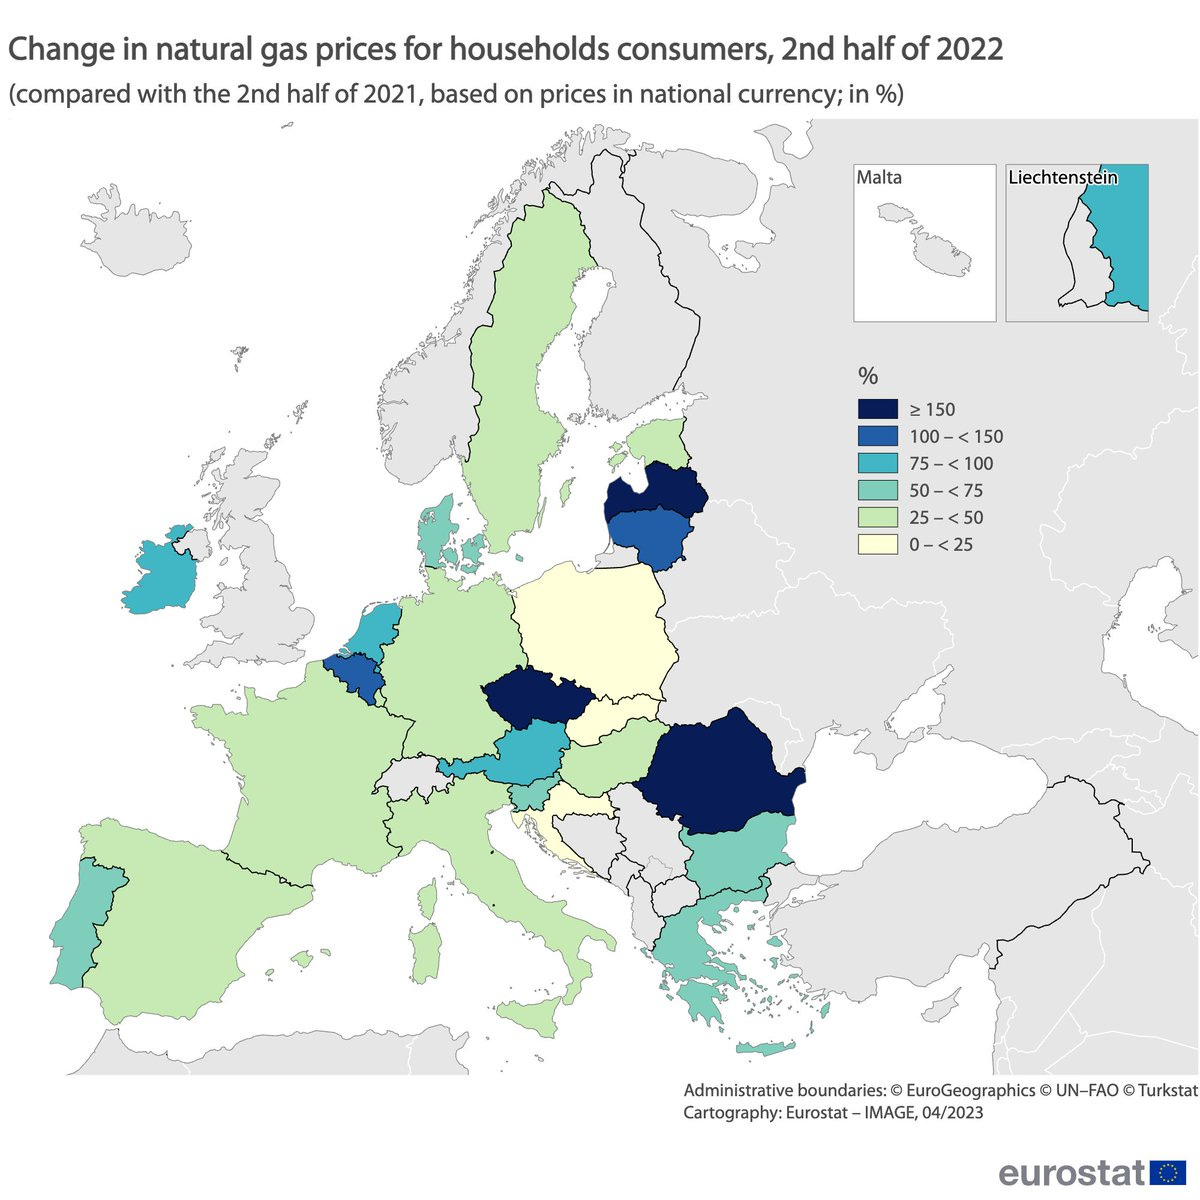 Map, change in natural gas prices for household consumers, 2nd half of 2022, compared with 2nd half of 2021, based on national currency, in percentage 
